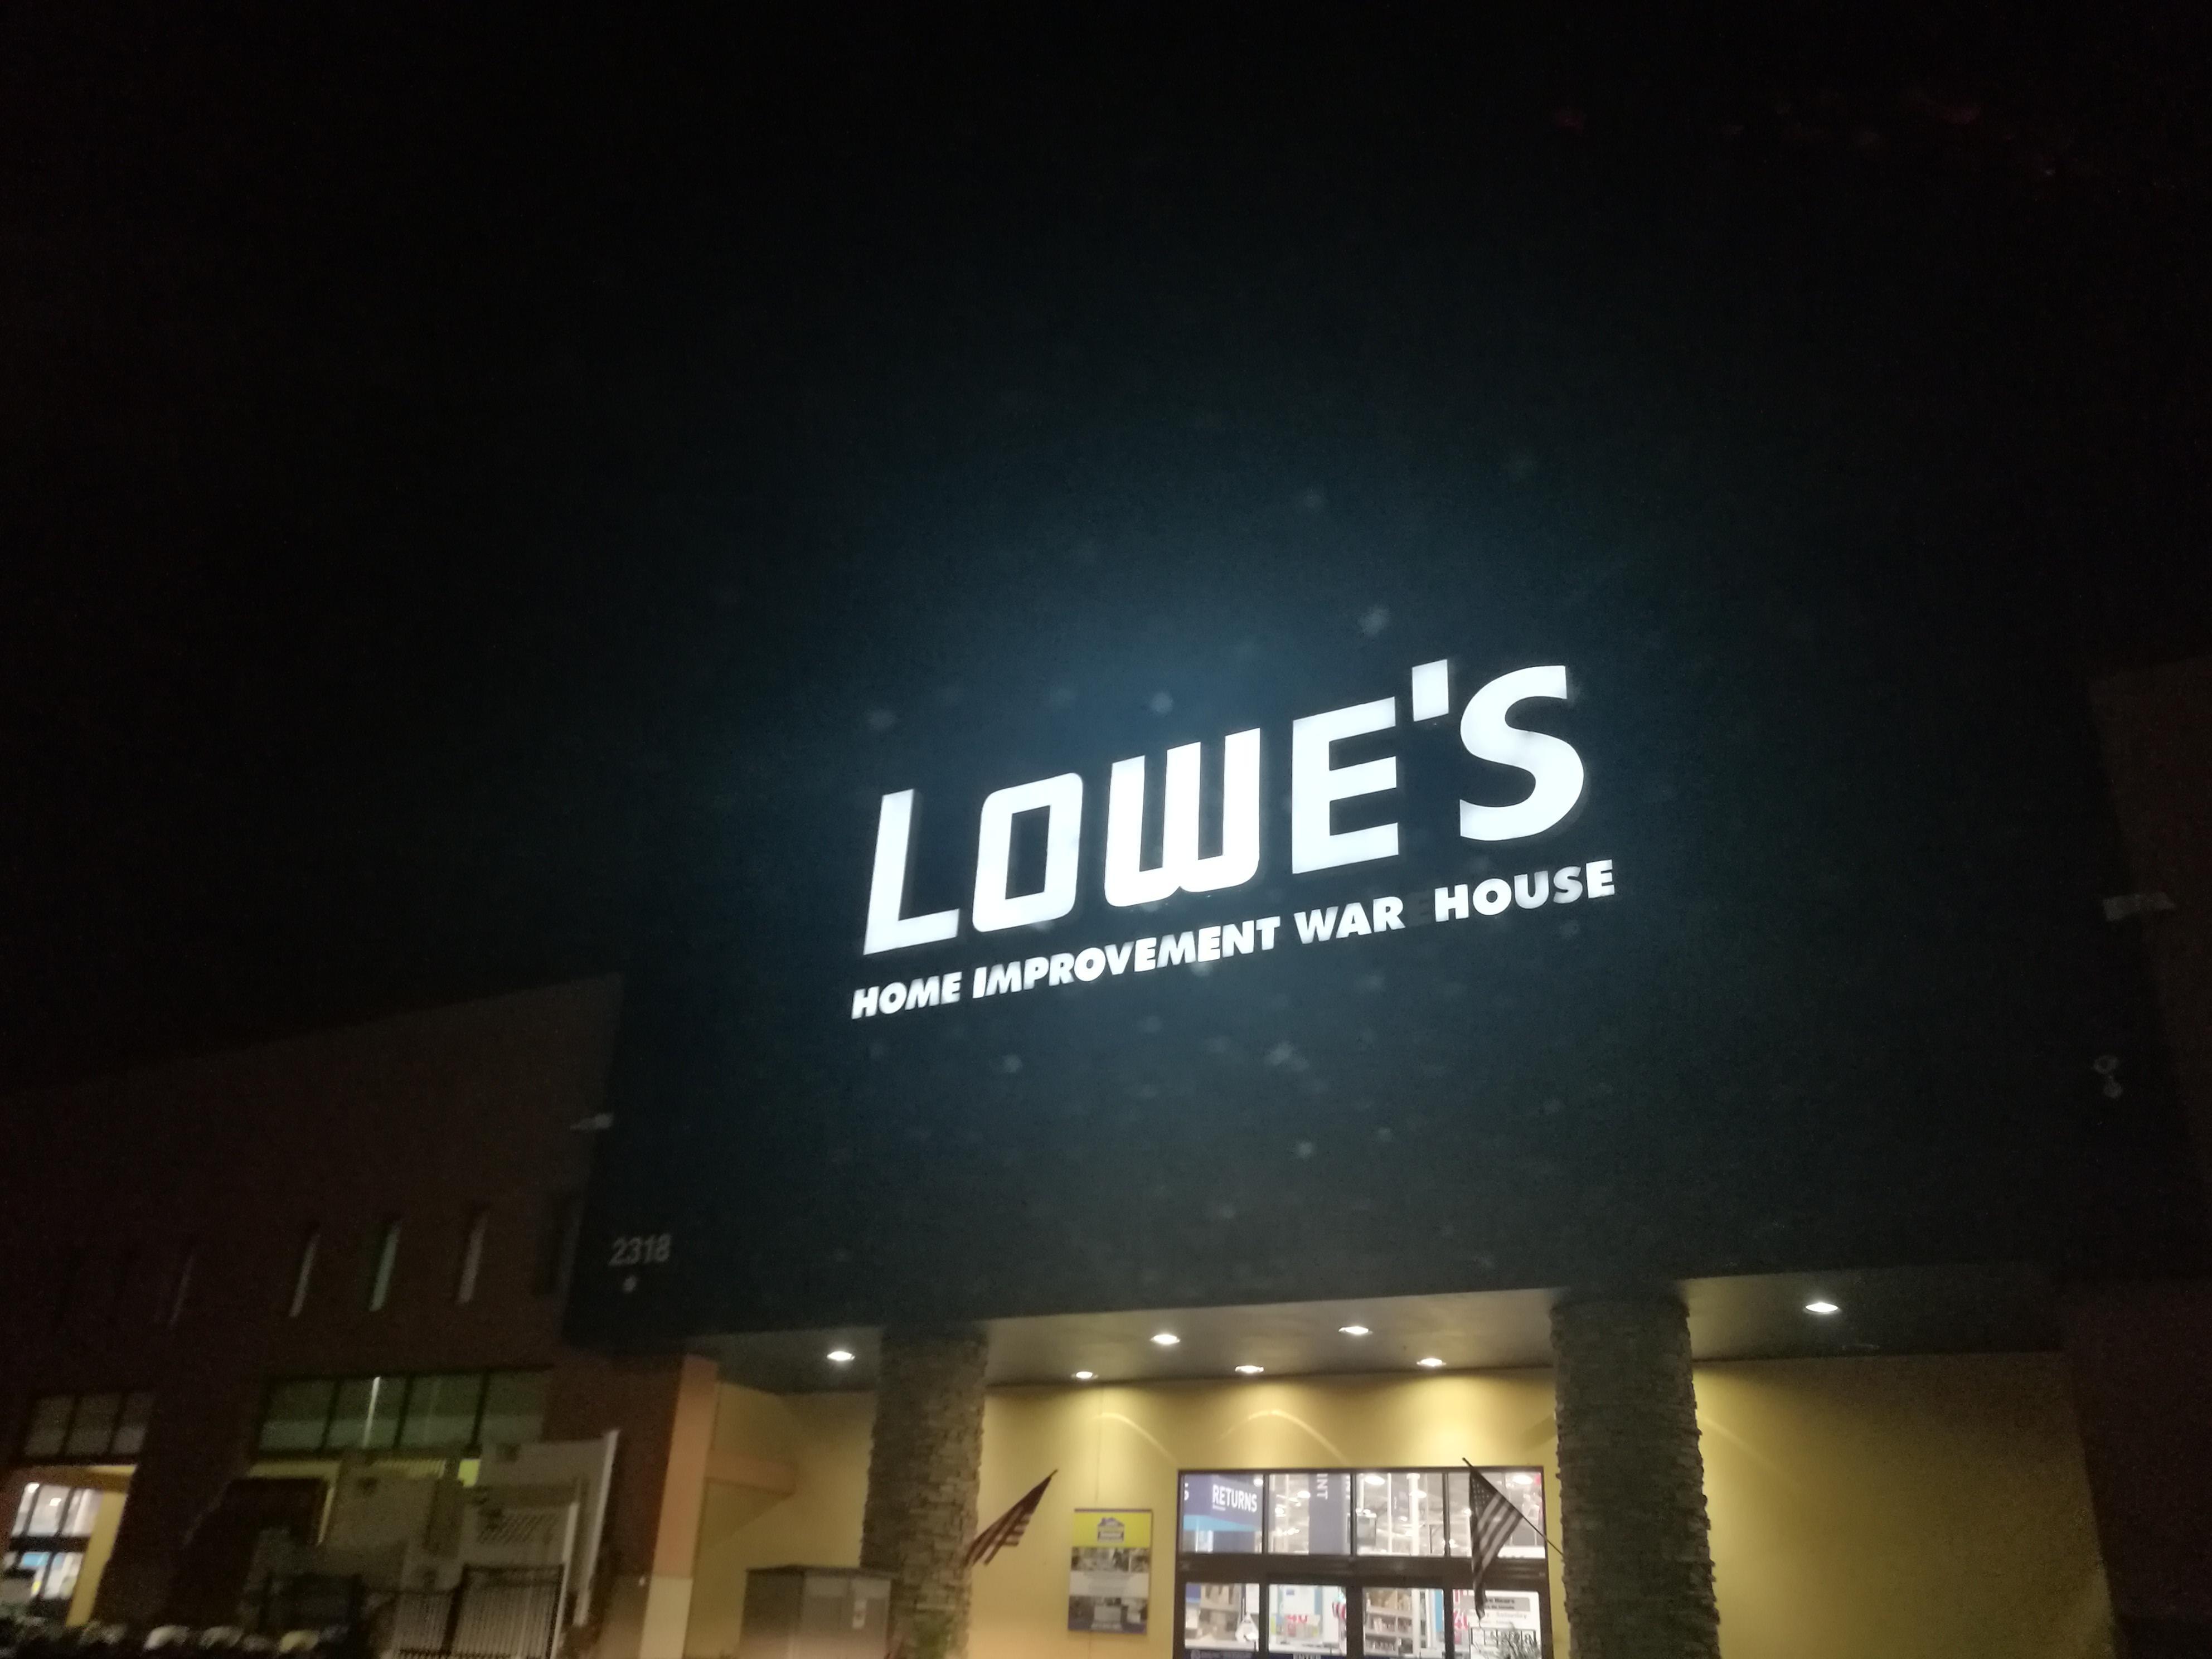 Funny Lowe's Logo - Lowes war house